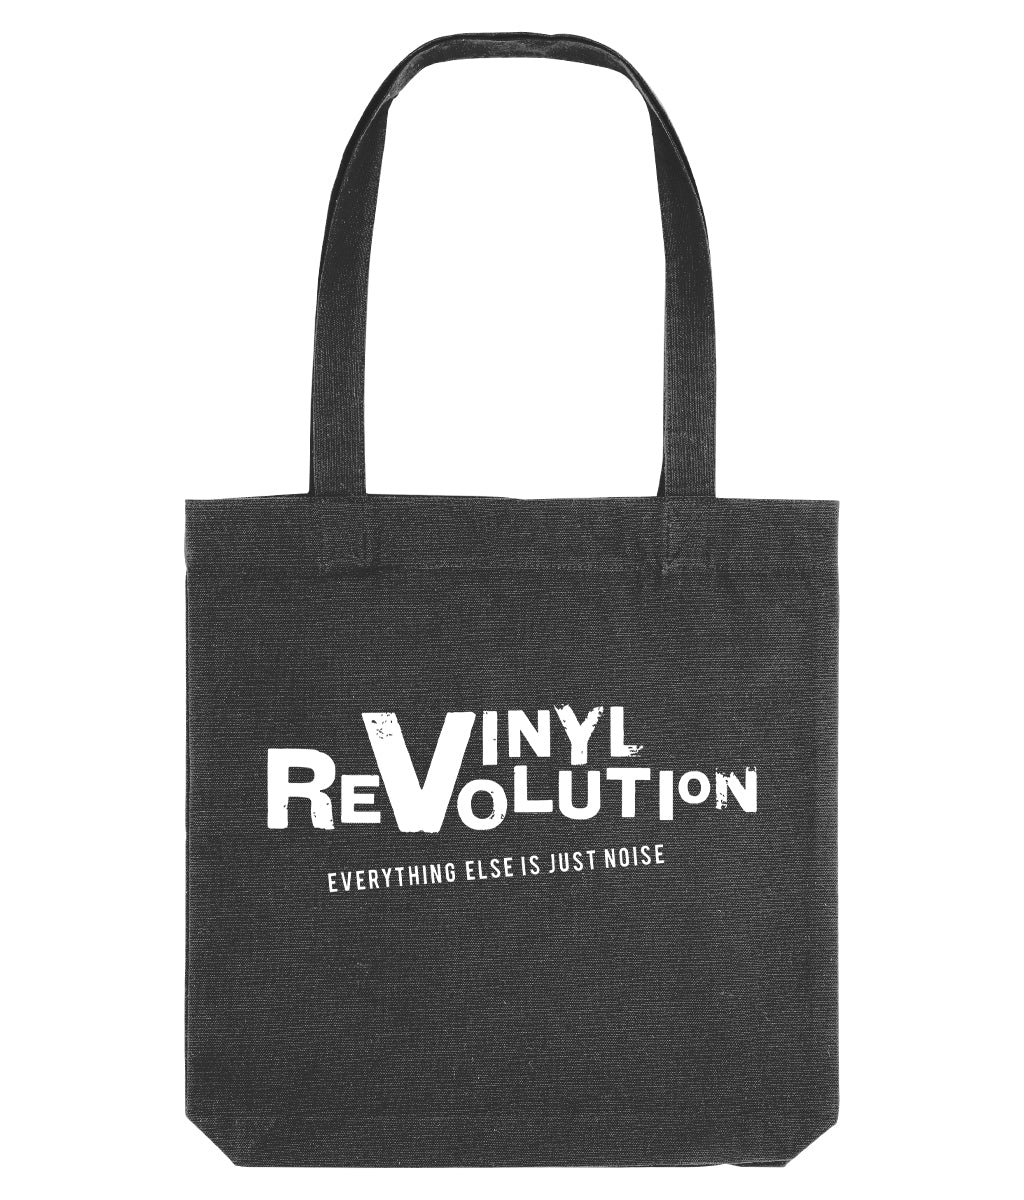 Some Things Get Better With Age & Vinyl Revolution Double Sided Organic Canvas Tote Bag